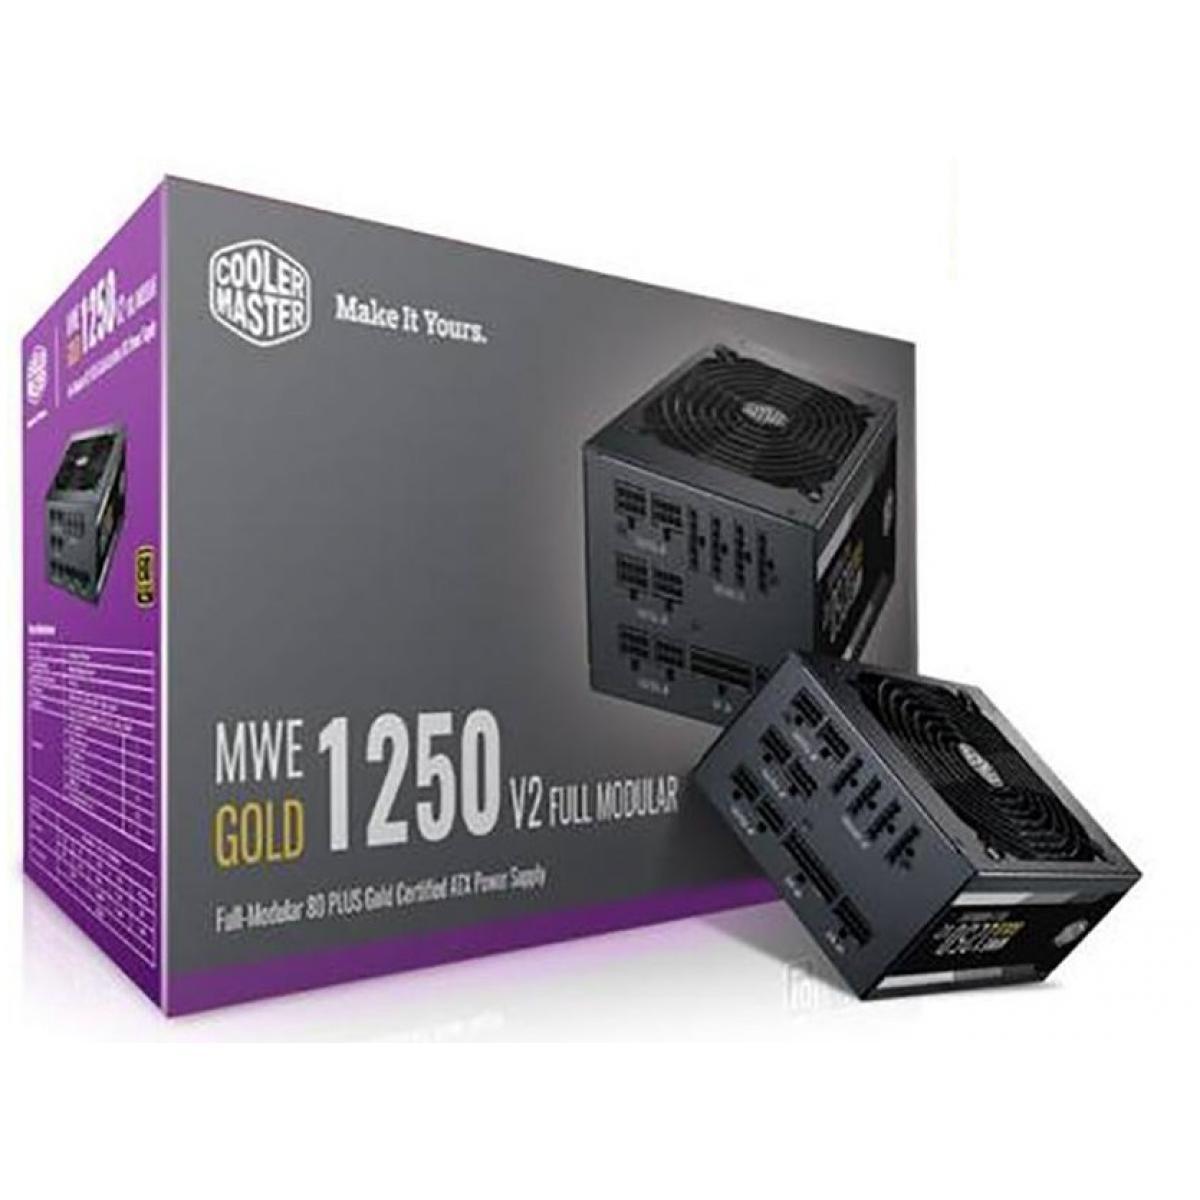 COOLER MASTER POWER SUPPLY Cooler Master MWE Gold 1250 V2 ,1250W Fully Modular 80+ RTX Ready,140mm Silent Fan Power Supply